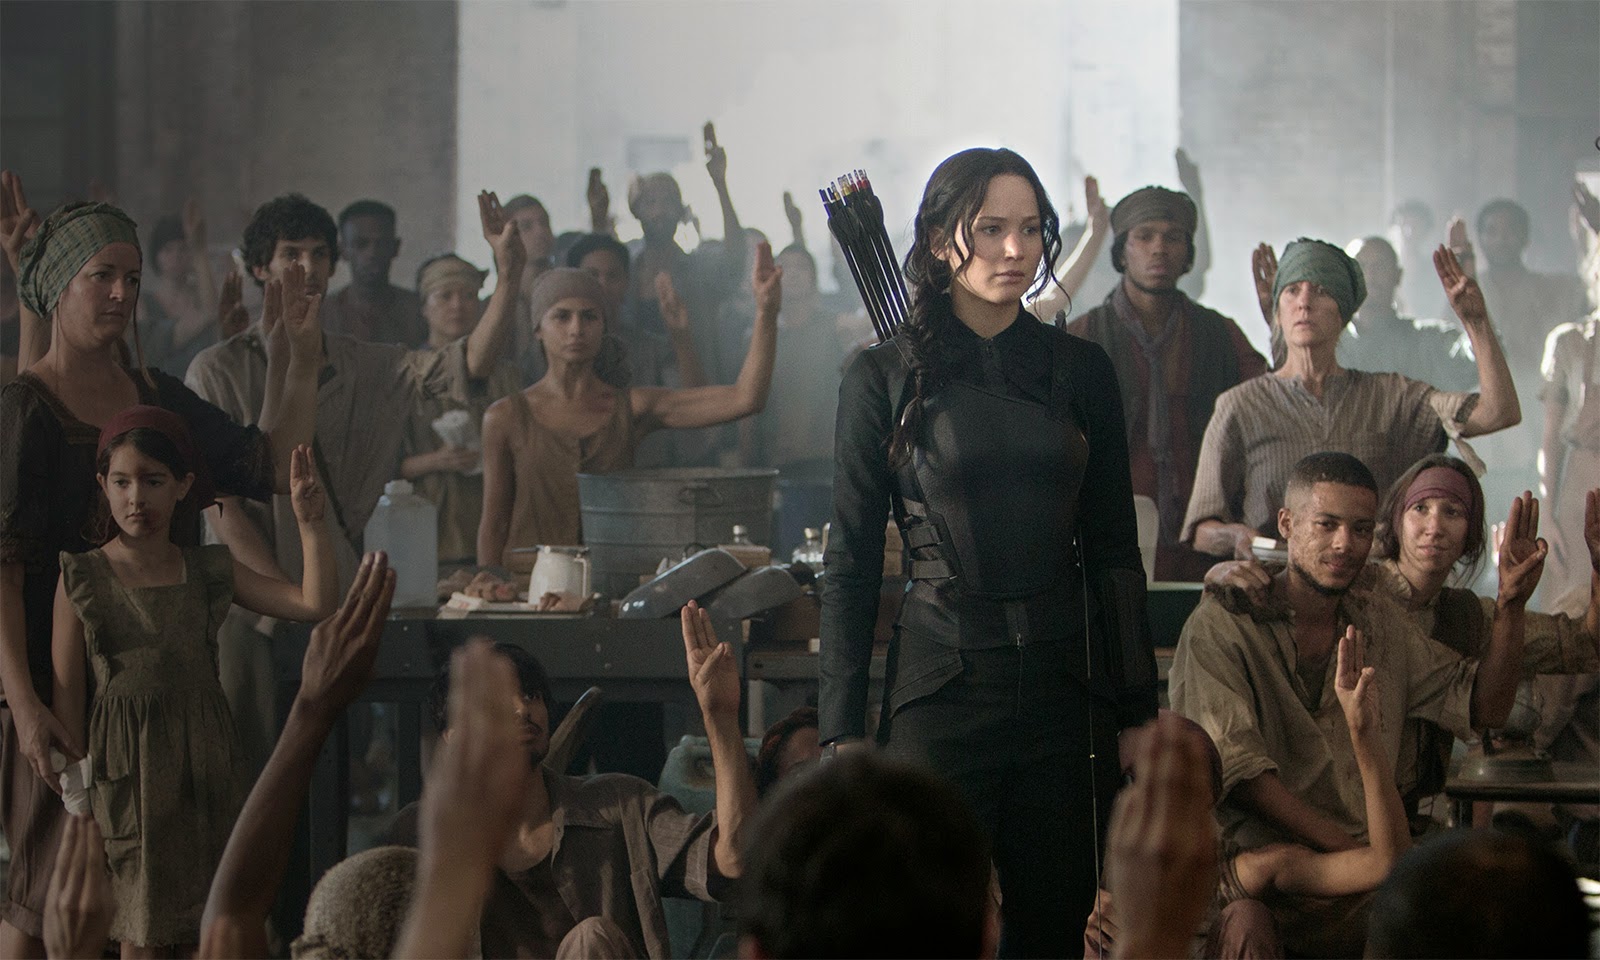 When-In-Manila-The-Hunger-Games-Mockingjay-Part-1-Katniss-Everdeen-Jennifer-Lawrence-movie-review-1